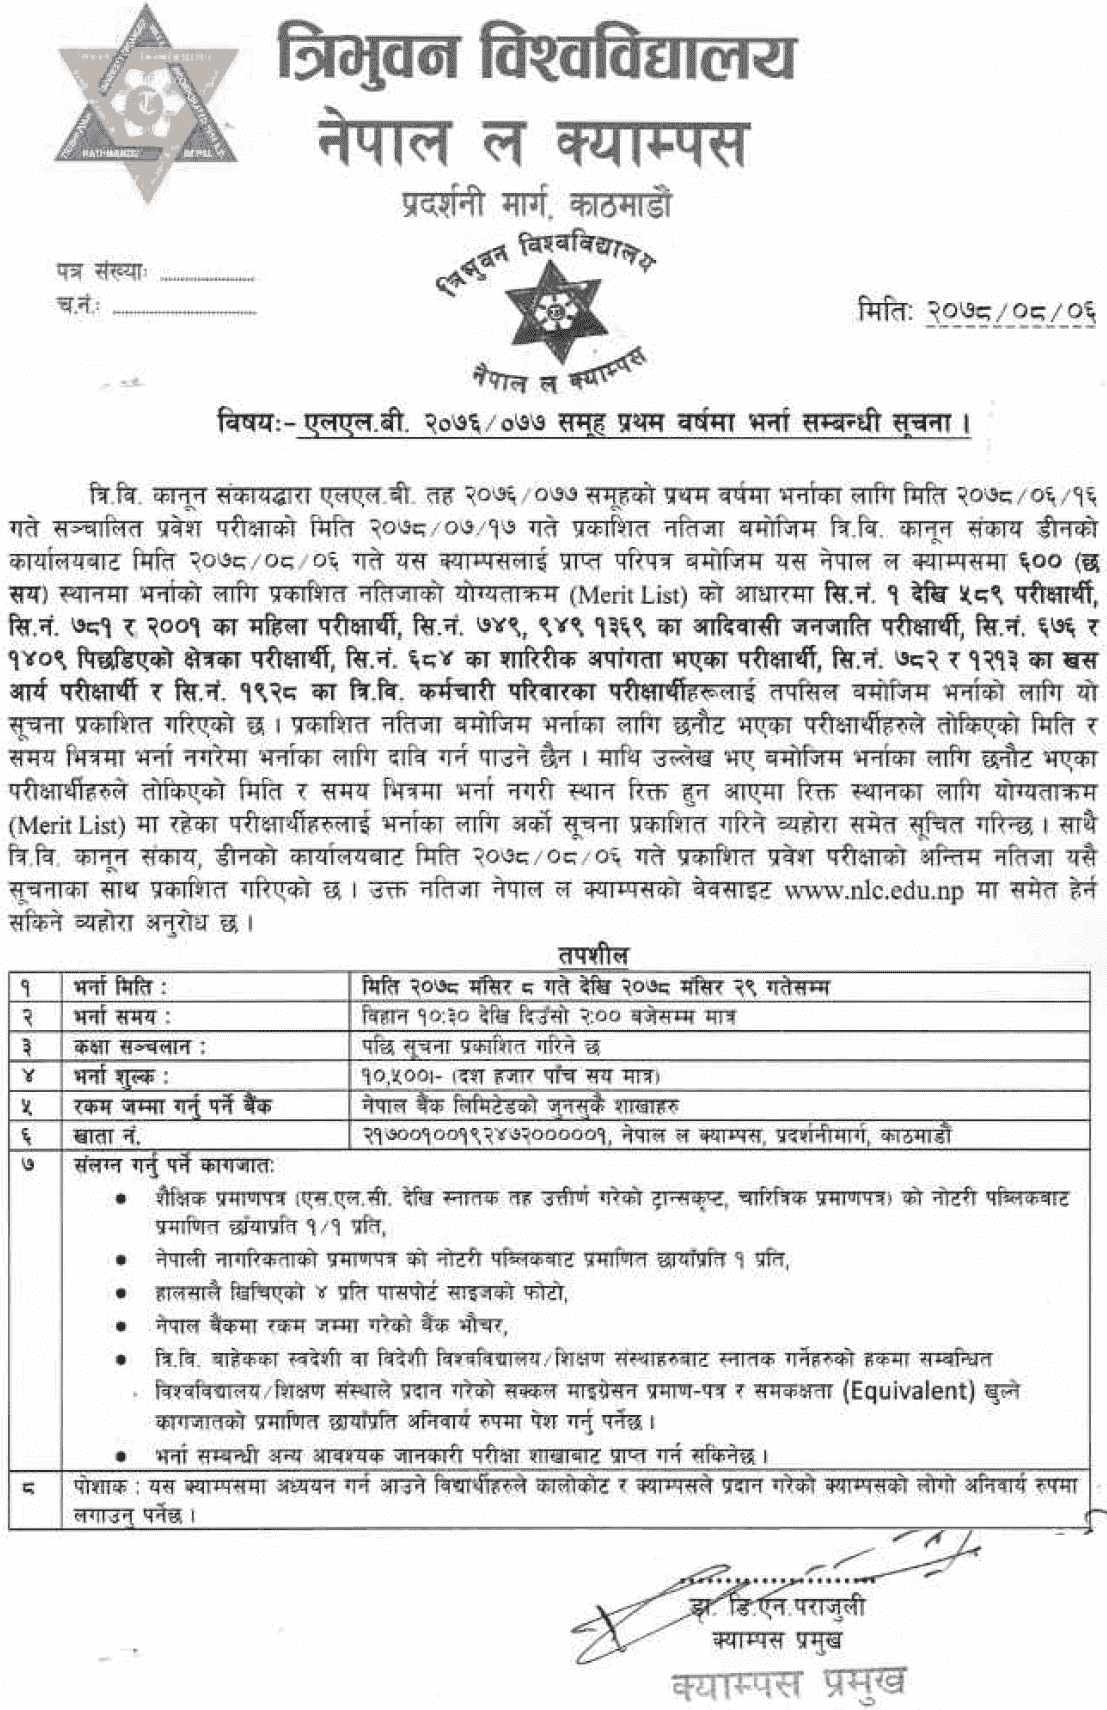 LLB First Year Admission Notice from Nepal Law Campus